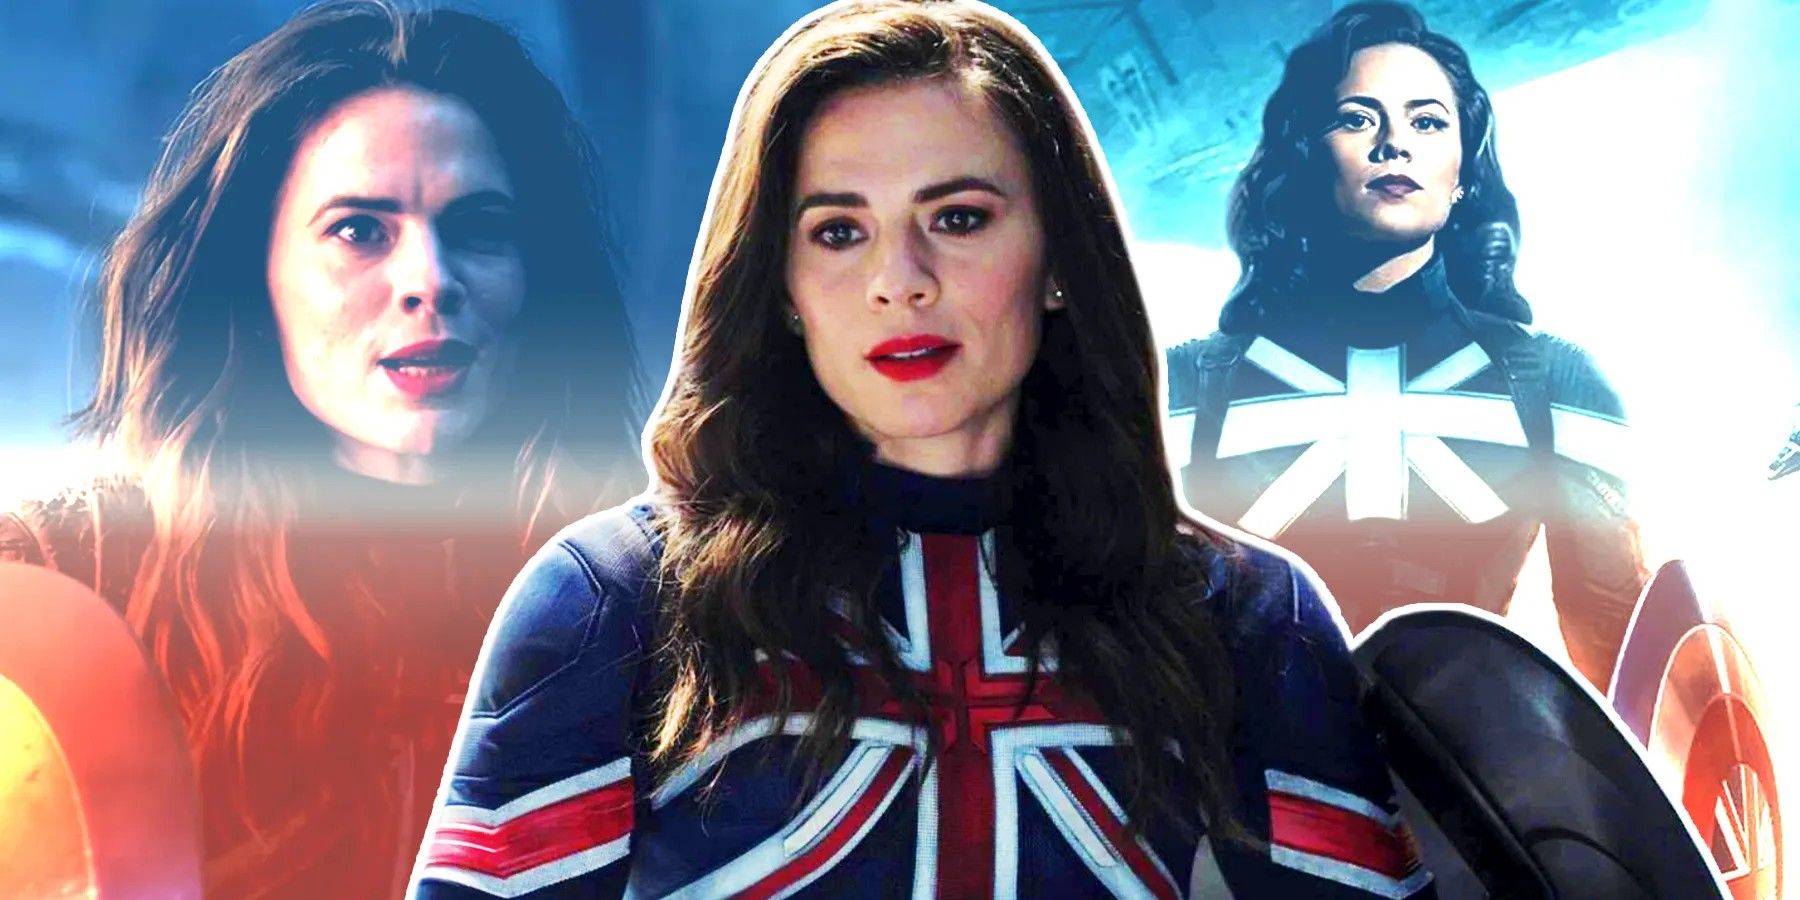 Hayley Atwell as Captain Carter as seen in the MCU